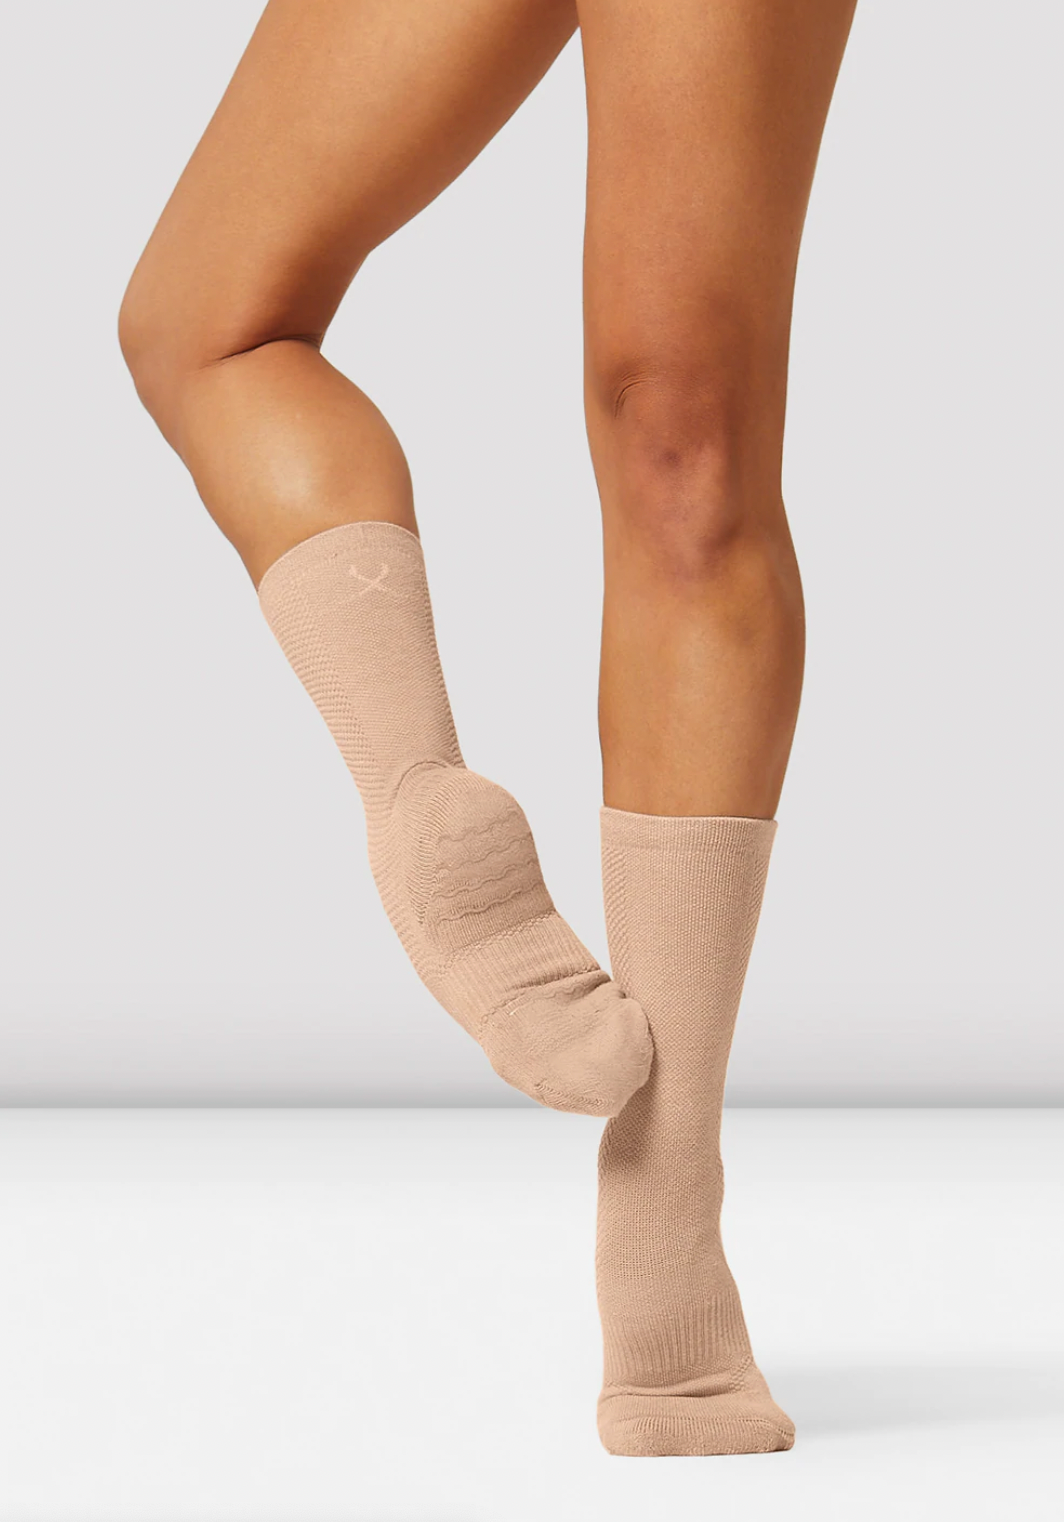 Blochsox dance socks in sand from the collective dancewear